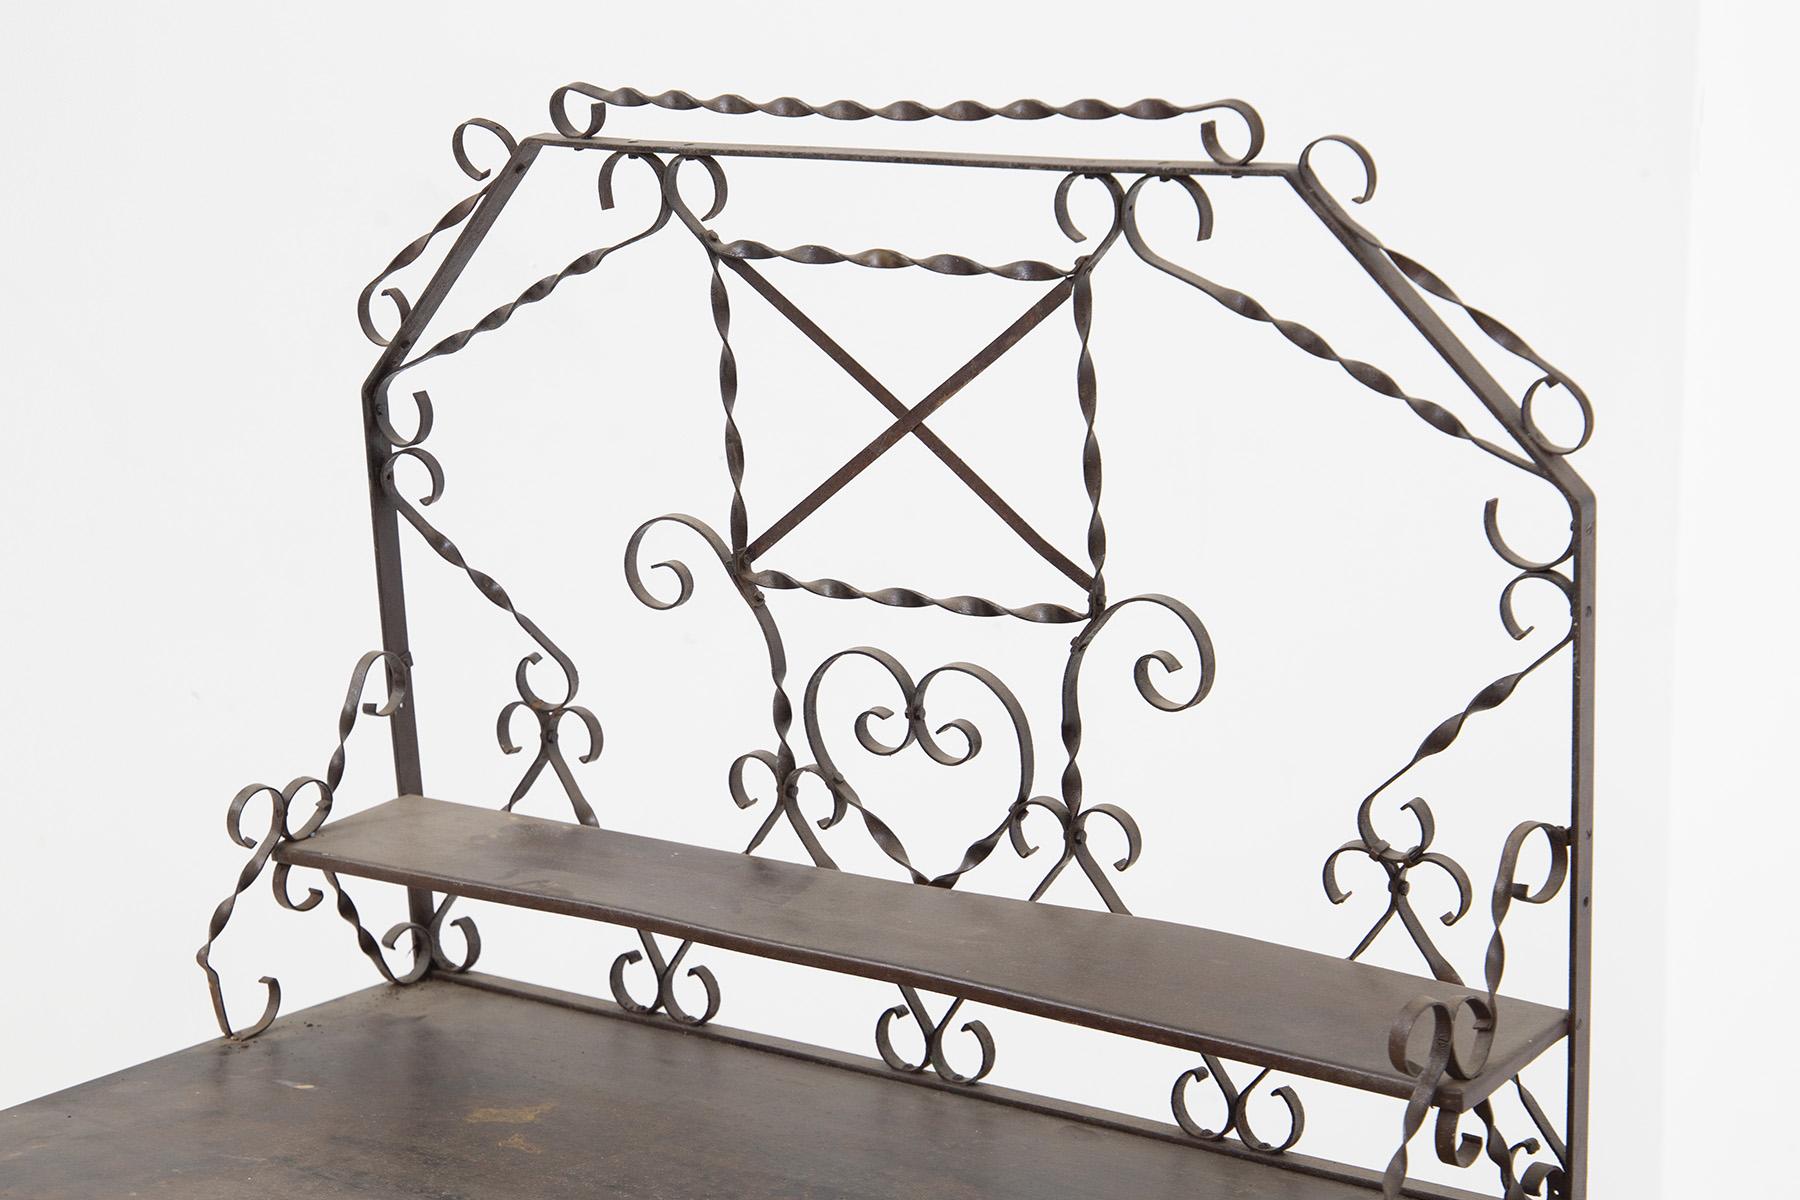 Beautiful French vanities dressing table belonging to the 1930s, made in France.
The toelette is entirely made of forged wrought iron, unparalleled craftsmanship.
There are 4 legs to support it, each shaped from 3 strands of curled iron, very